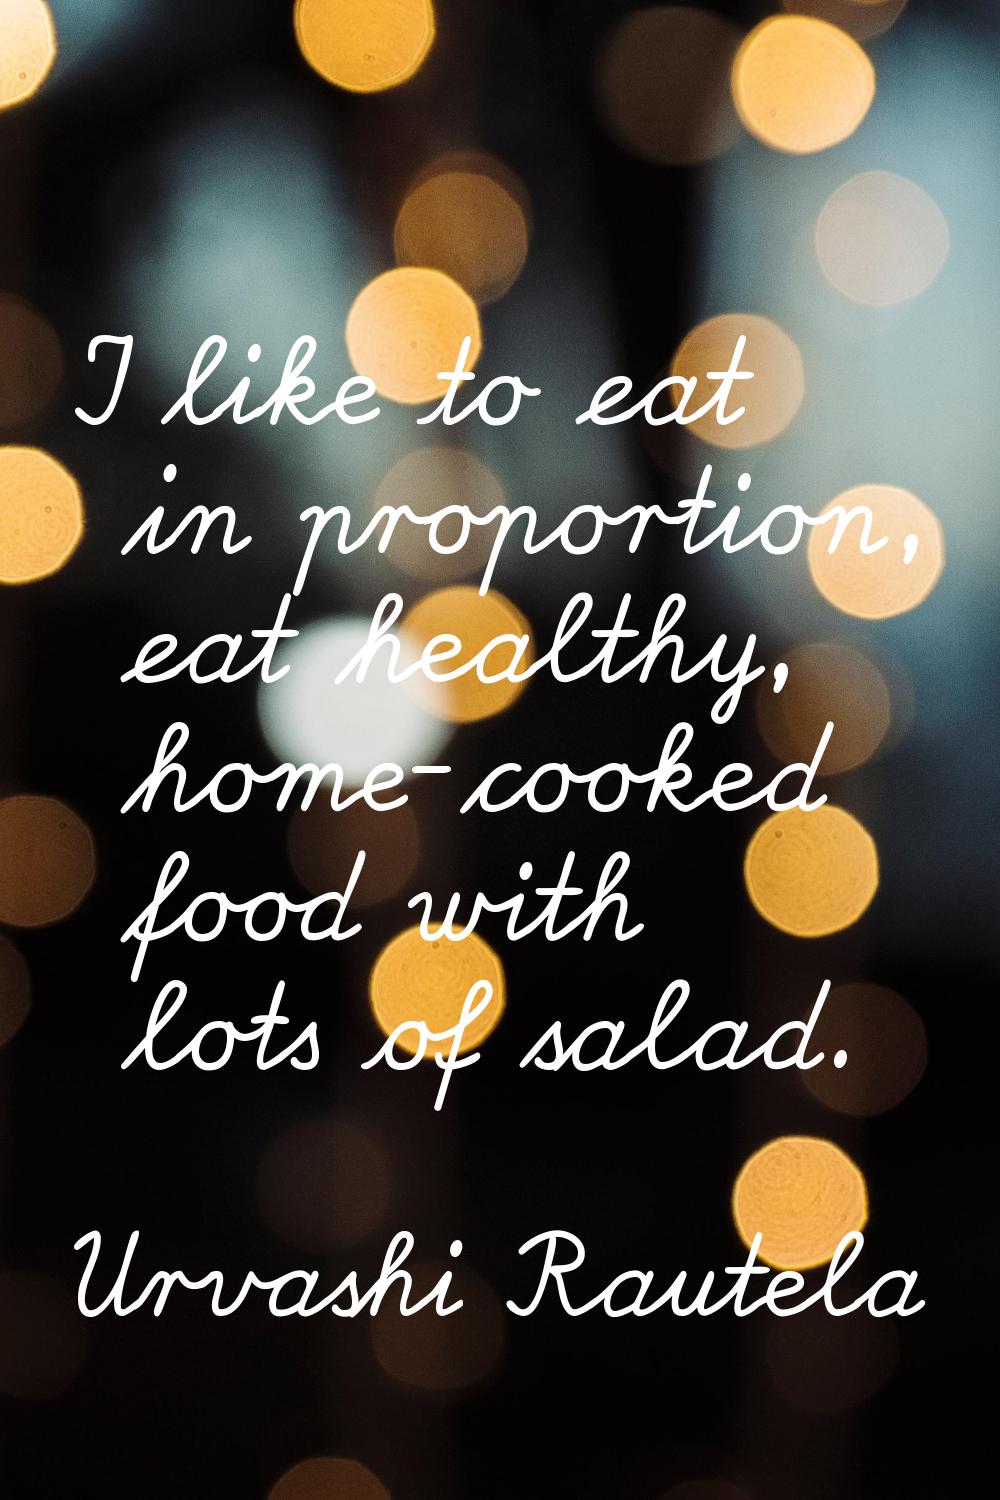 I like to eat in proportion, eat healthy, home-cooked food with lots of salad.